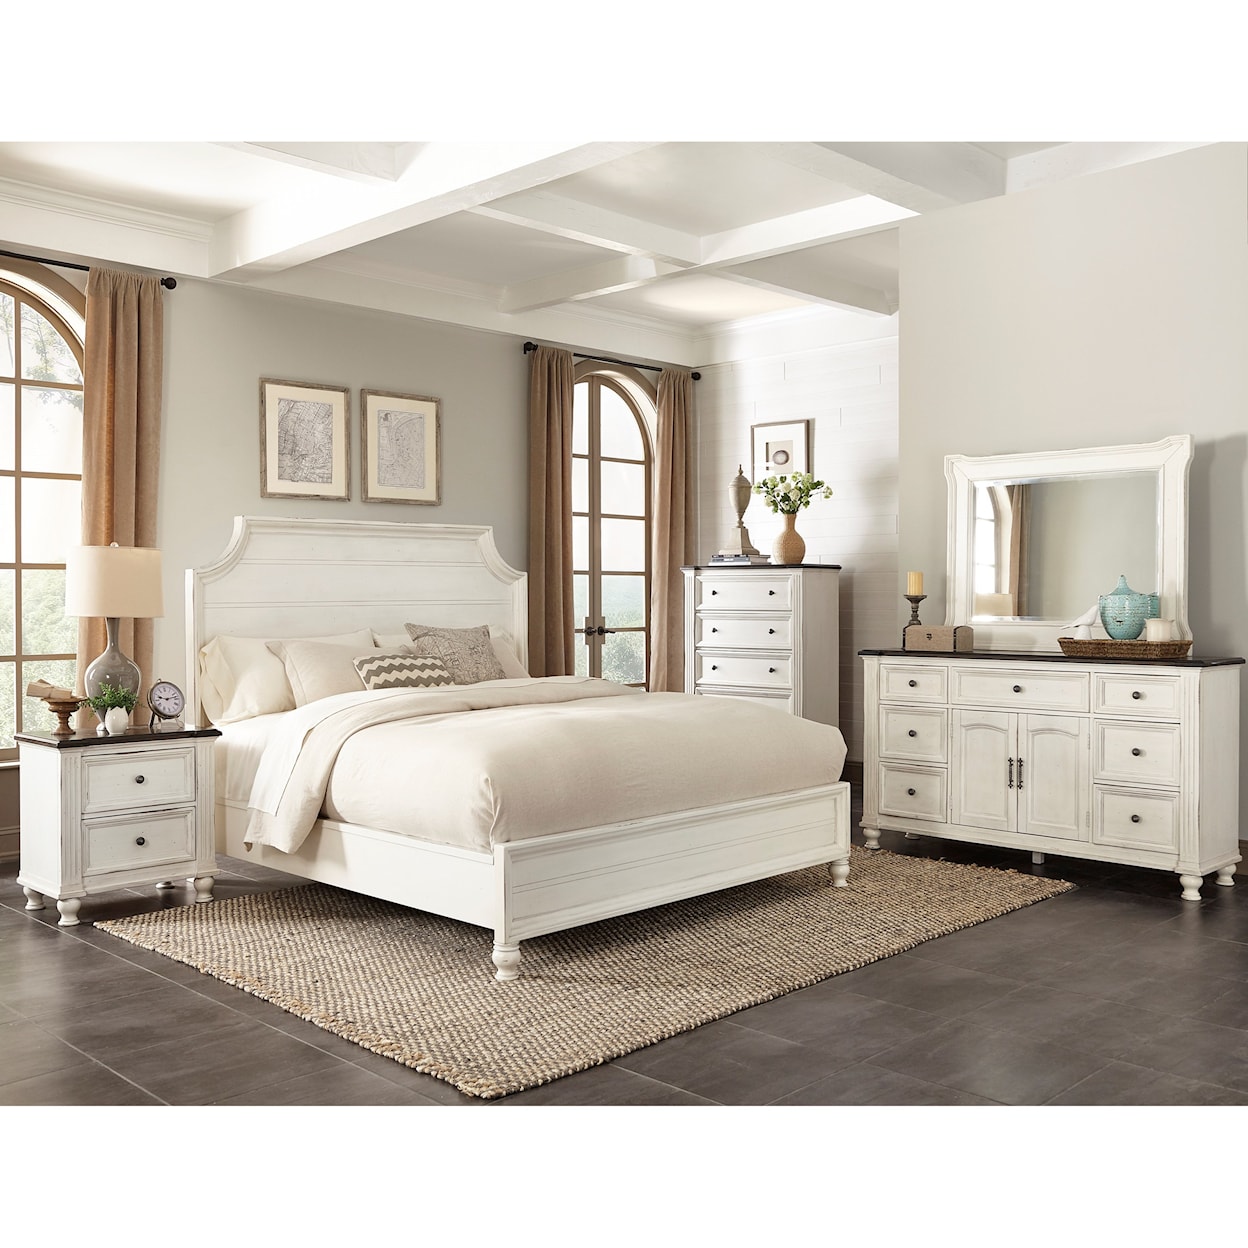 Sunny Designs Carriage House King Bedroom Group